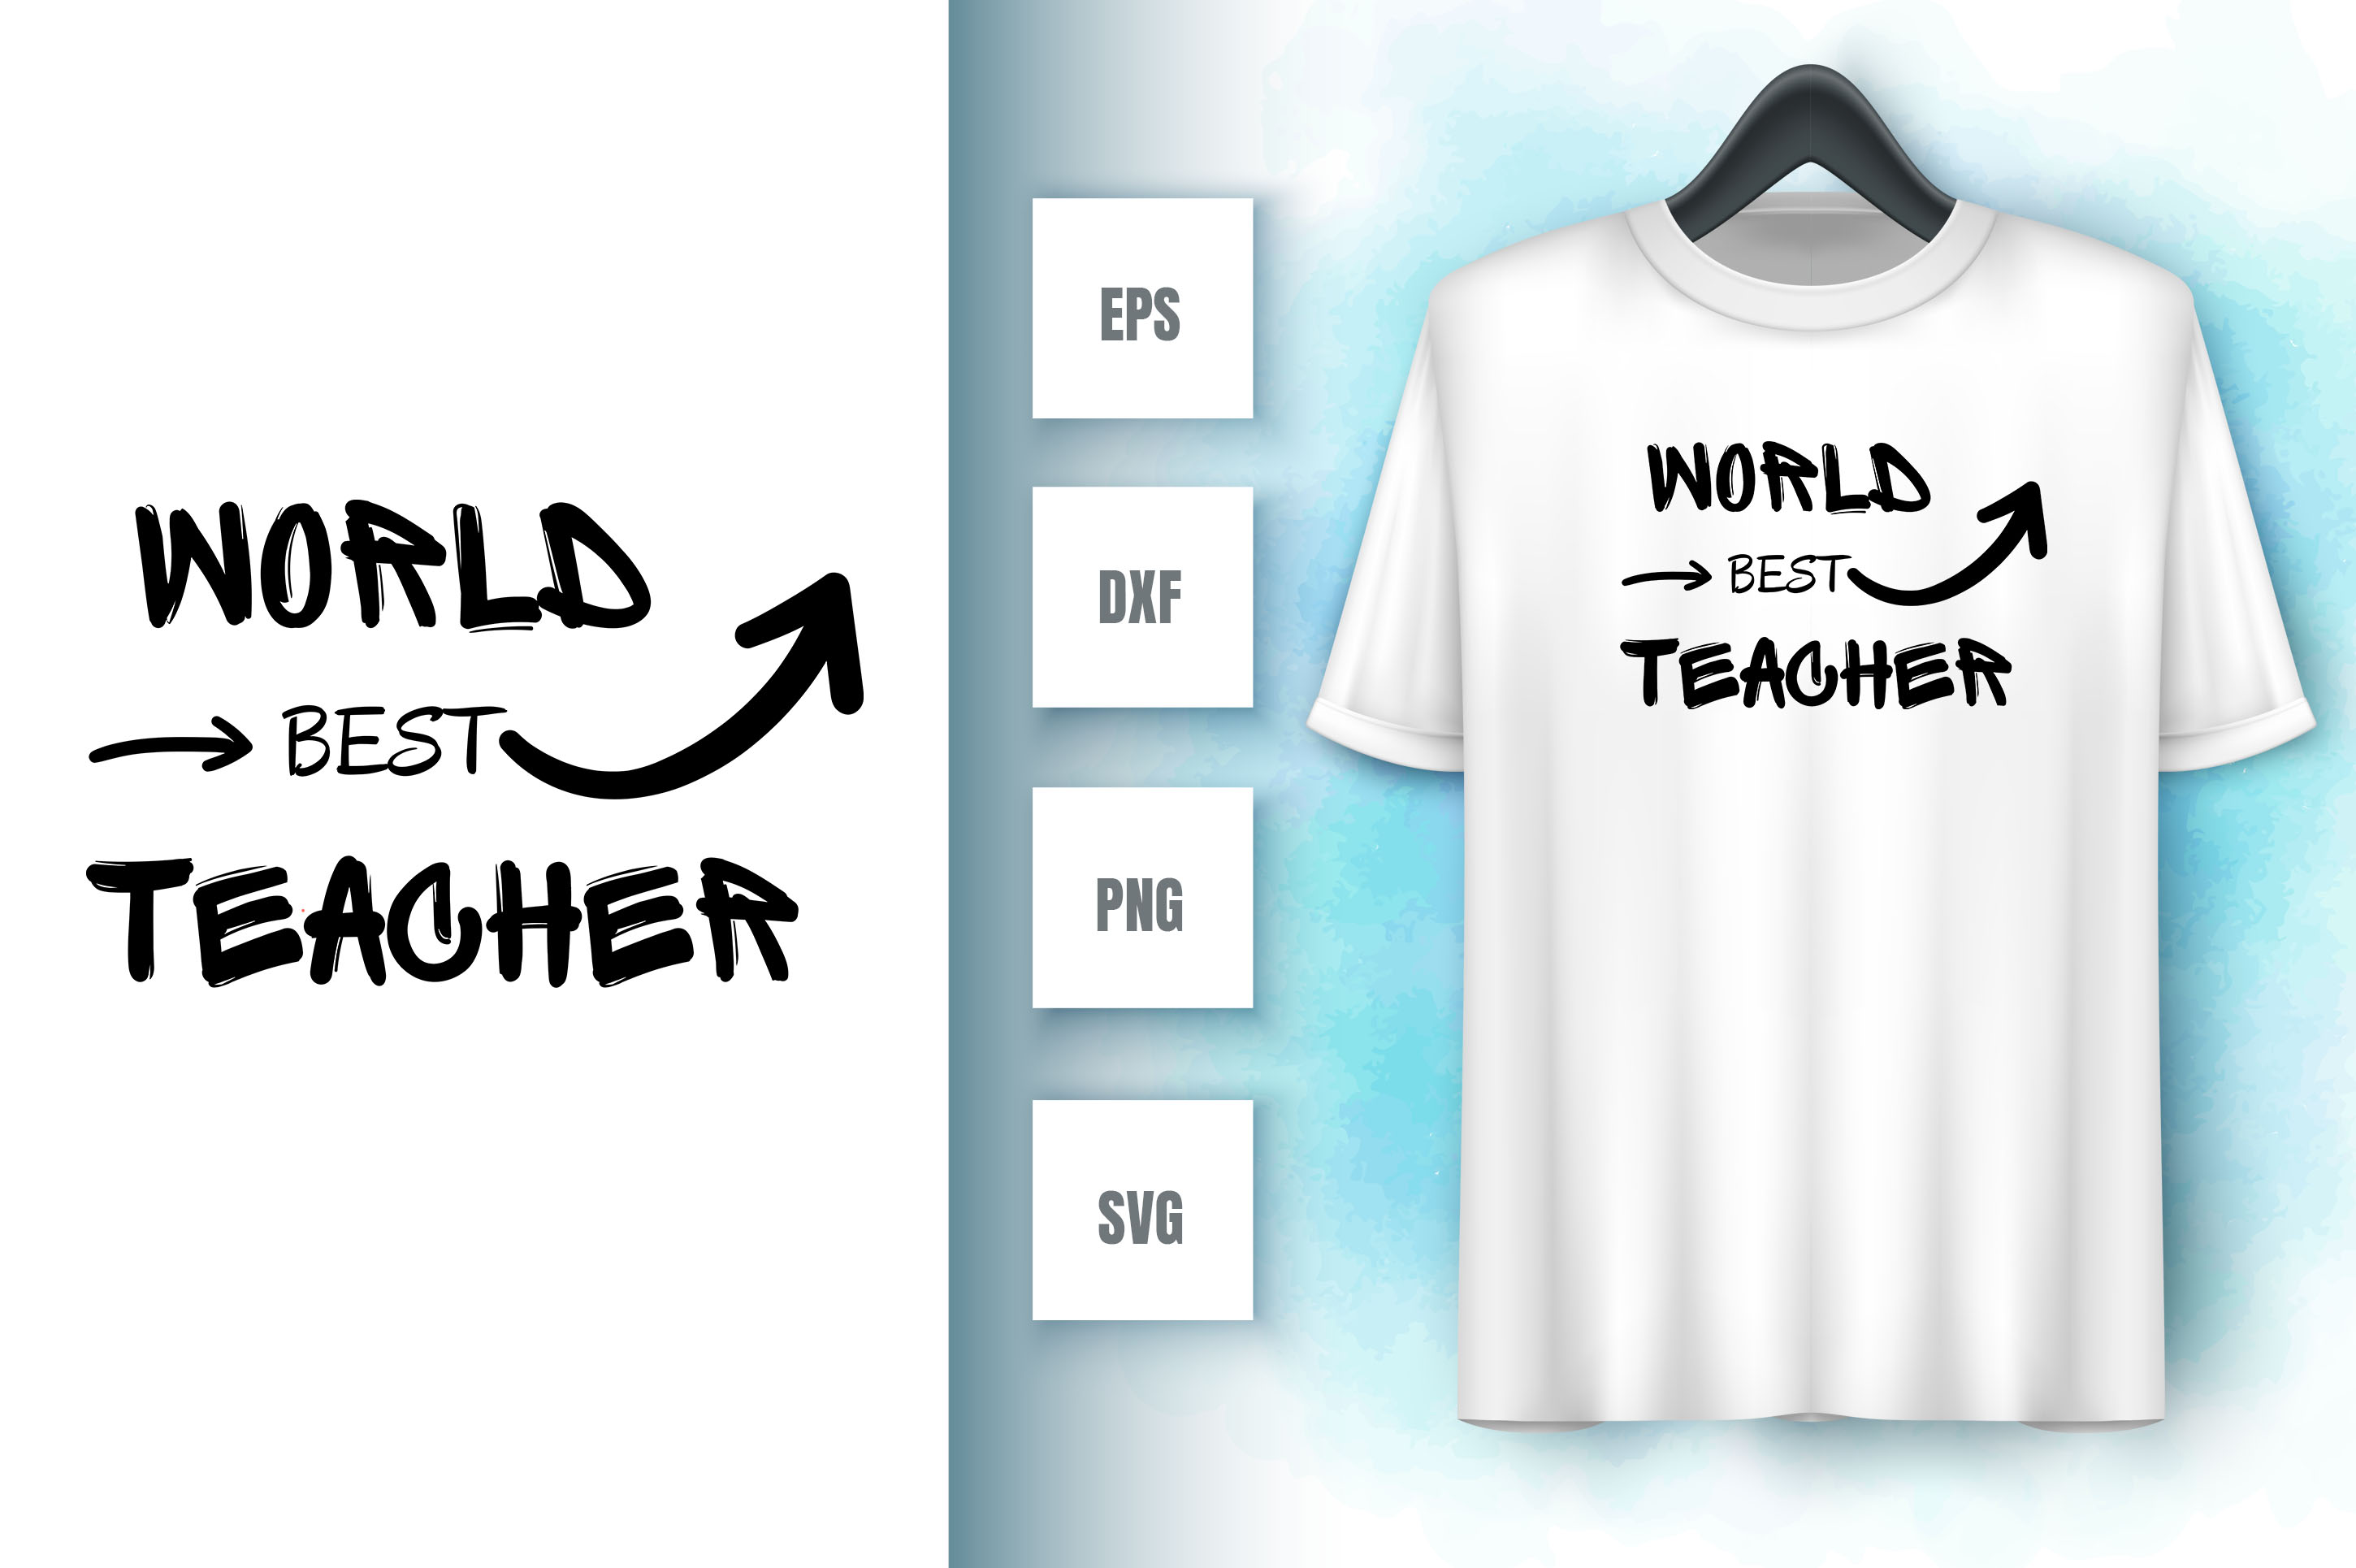 Image of a white t-shirt with an amazing inscription world best teacher